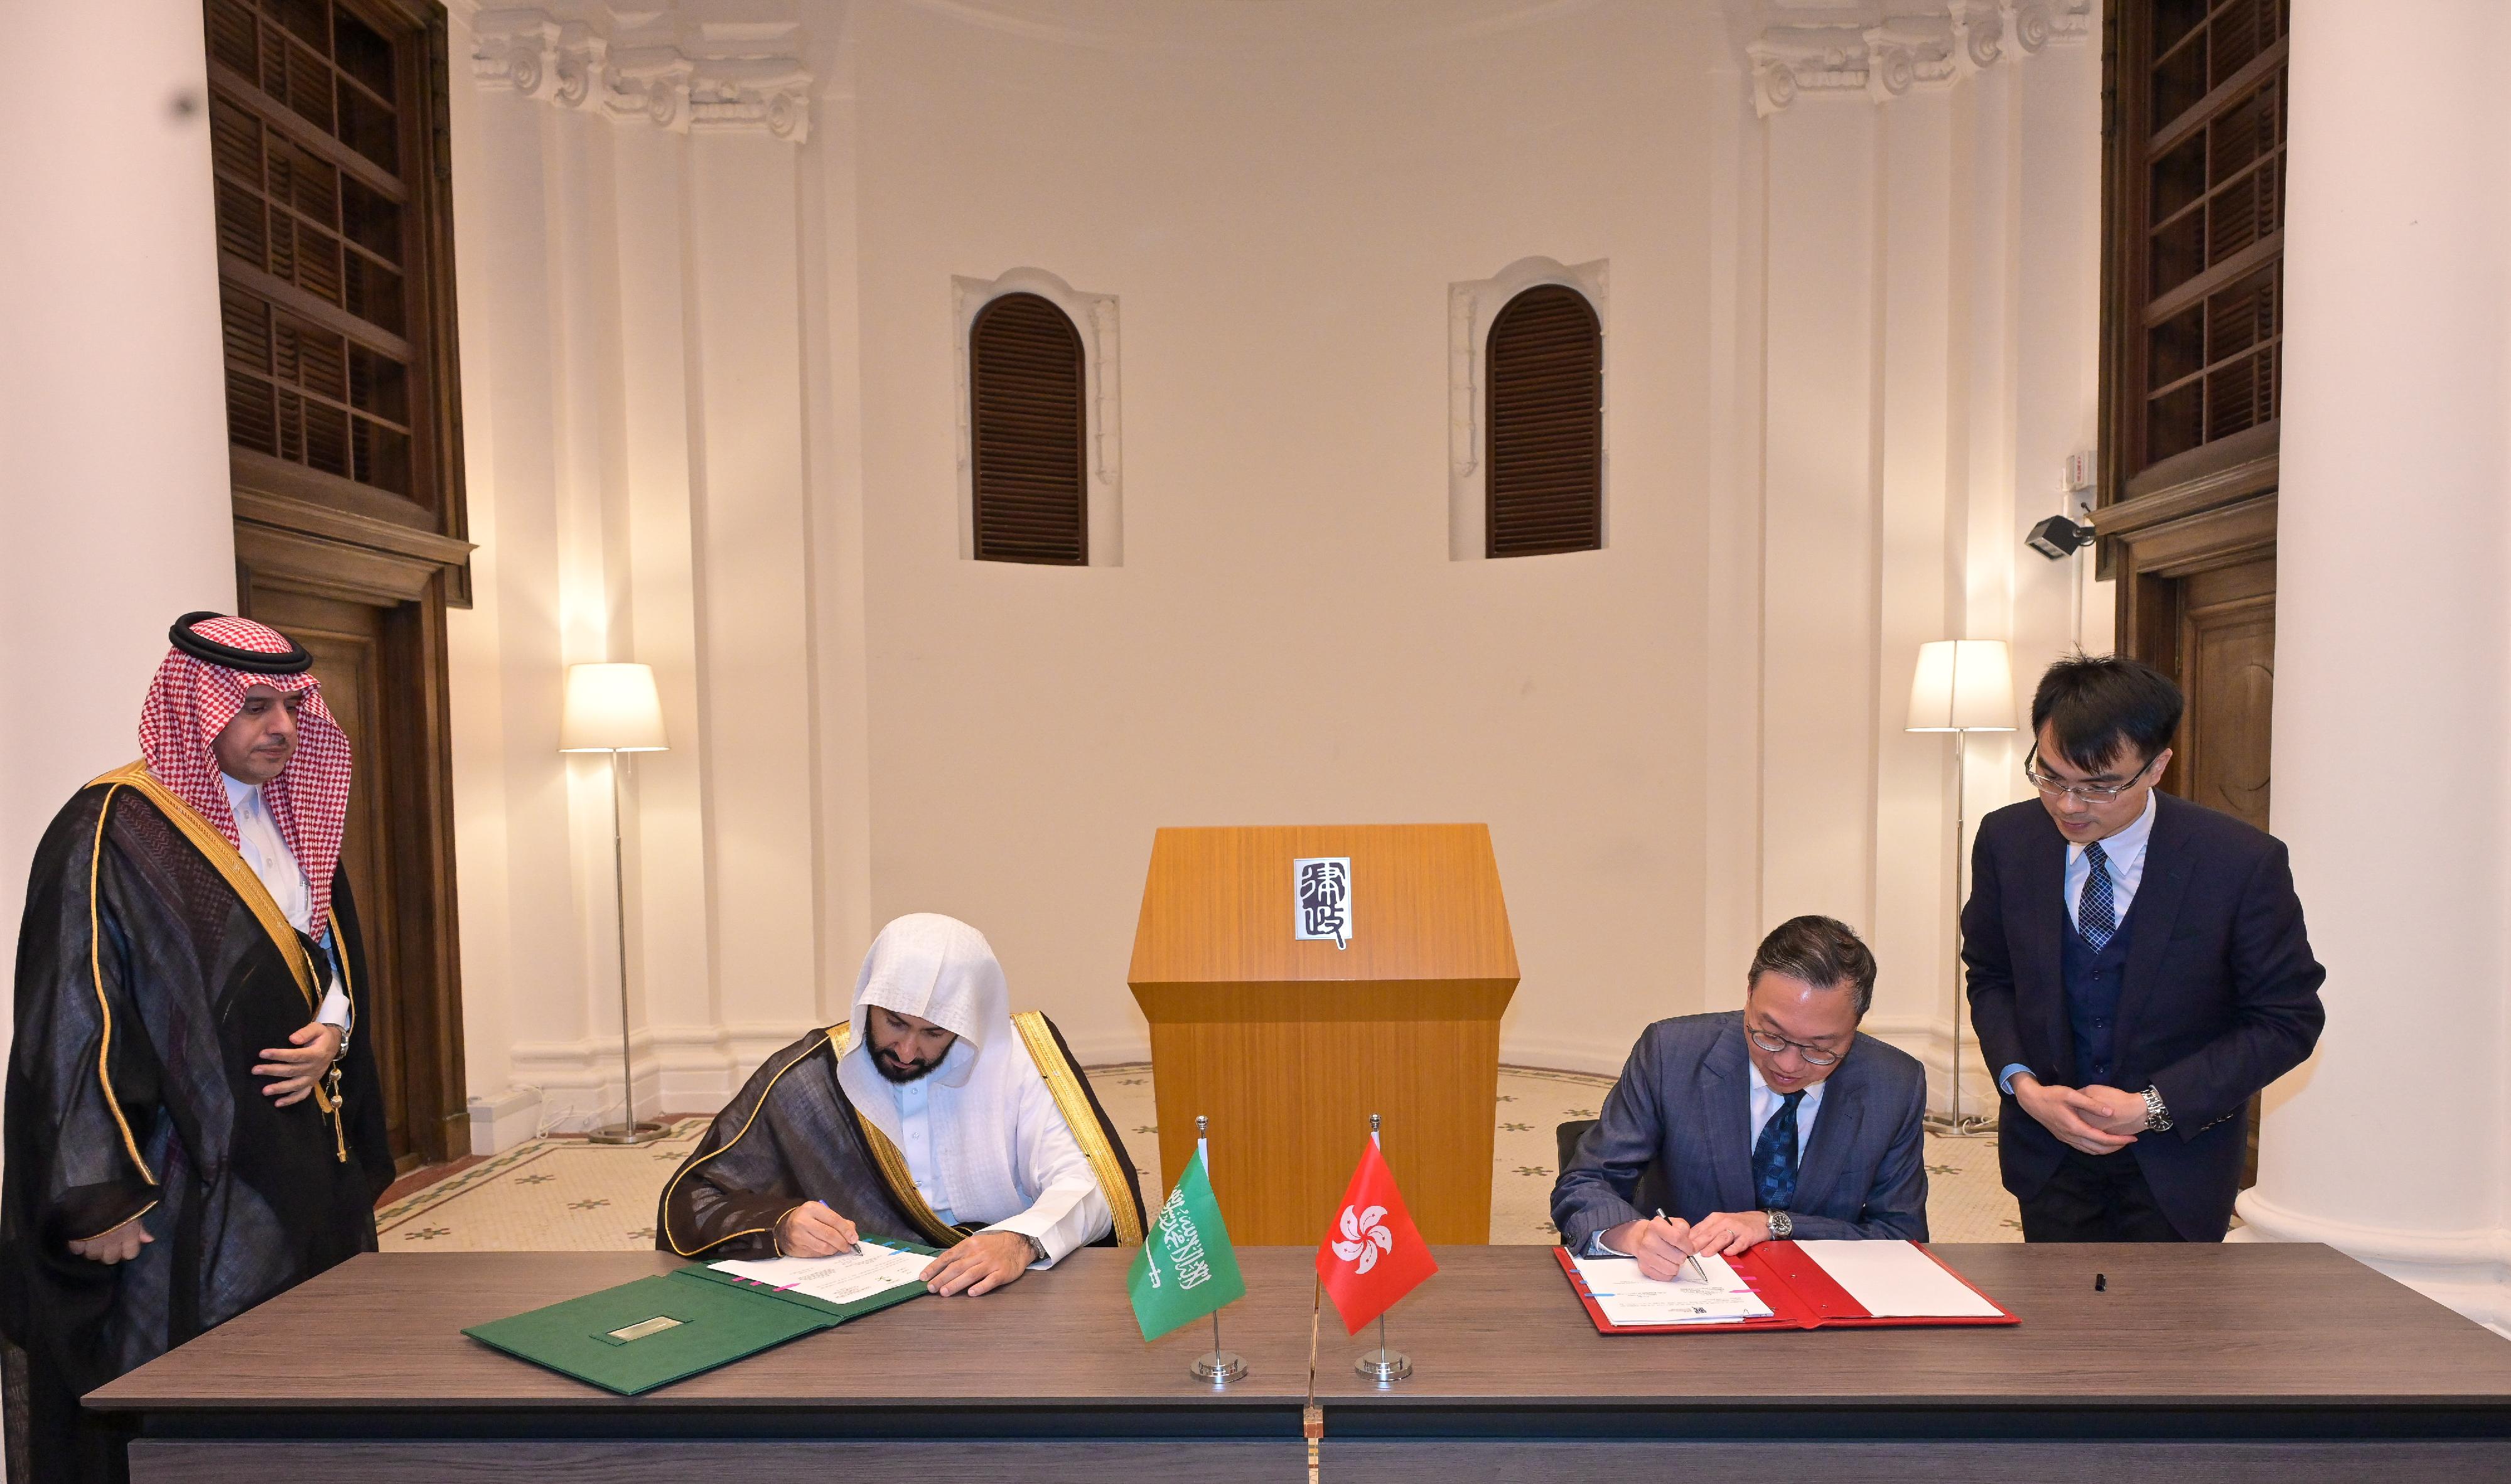 The Department of Justice of the Hong Kong Special Administrative Region and the Ministry of Justice of the Kingdom of Saudi Arabia signed a Memorandum of Understanding of Cooperation today (April 22) to strengthen their co-operation on issues relating to dispute avoidance and resolution. Photo shows the Secretary for Justice, Mr Paul Lam, SC (second right), and the Minister of Justice of the Kingdom of Saudi Arabia, Dr Waleed Mohammed Alsmani (second left), signing the memorandum.